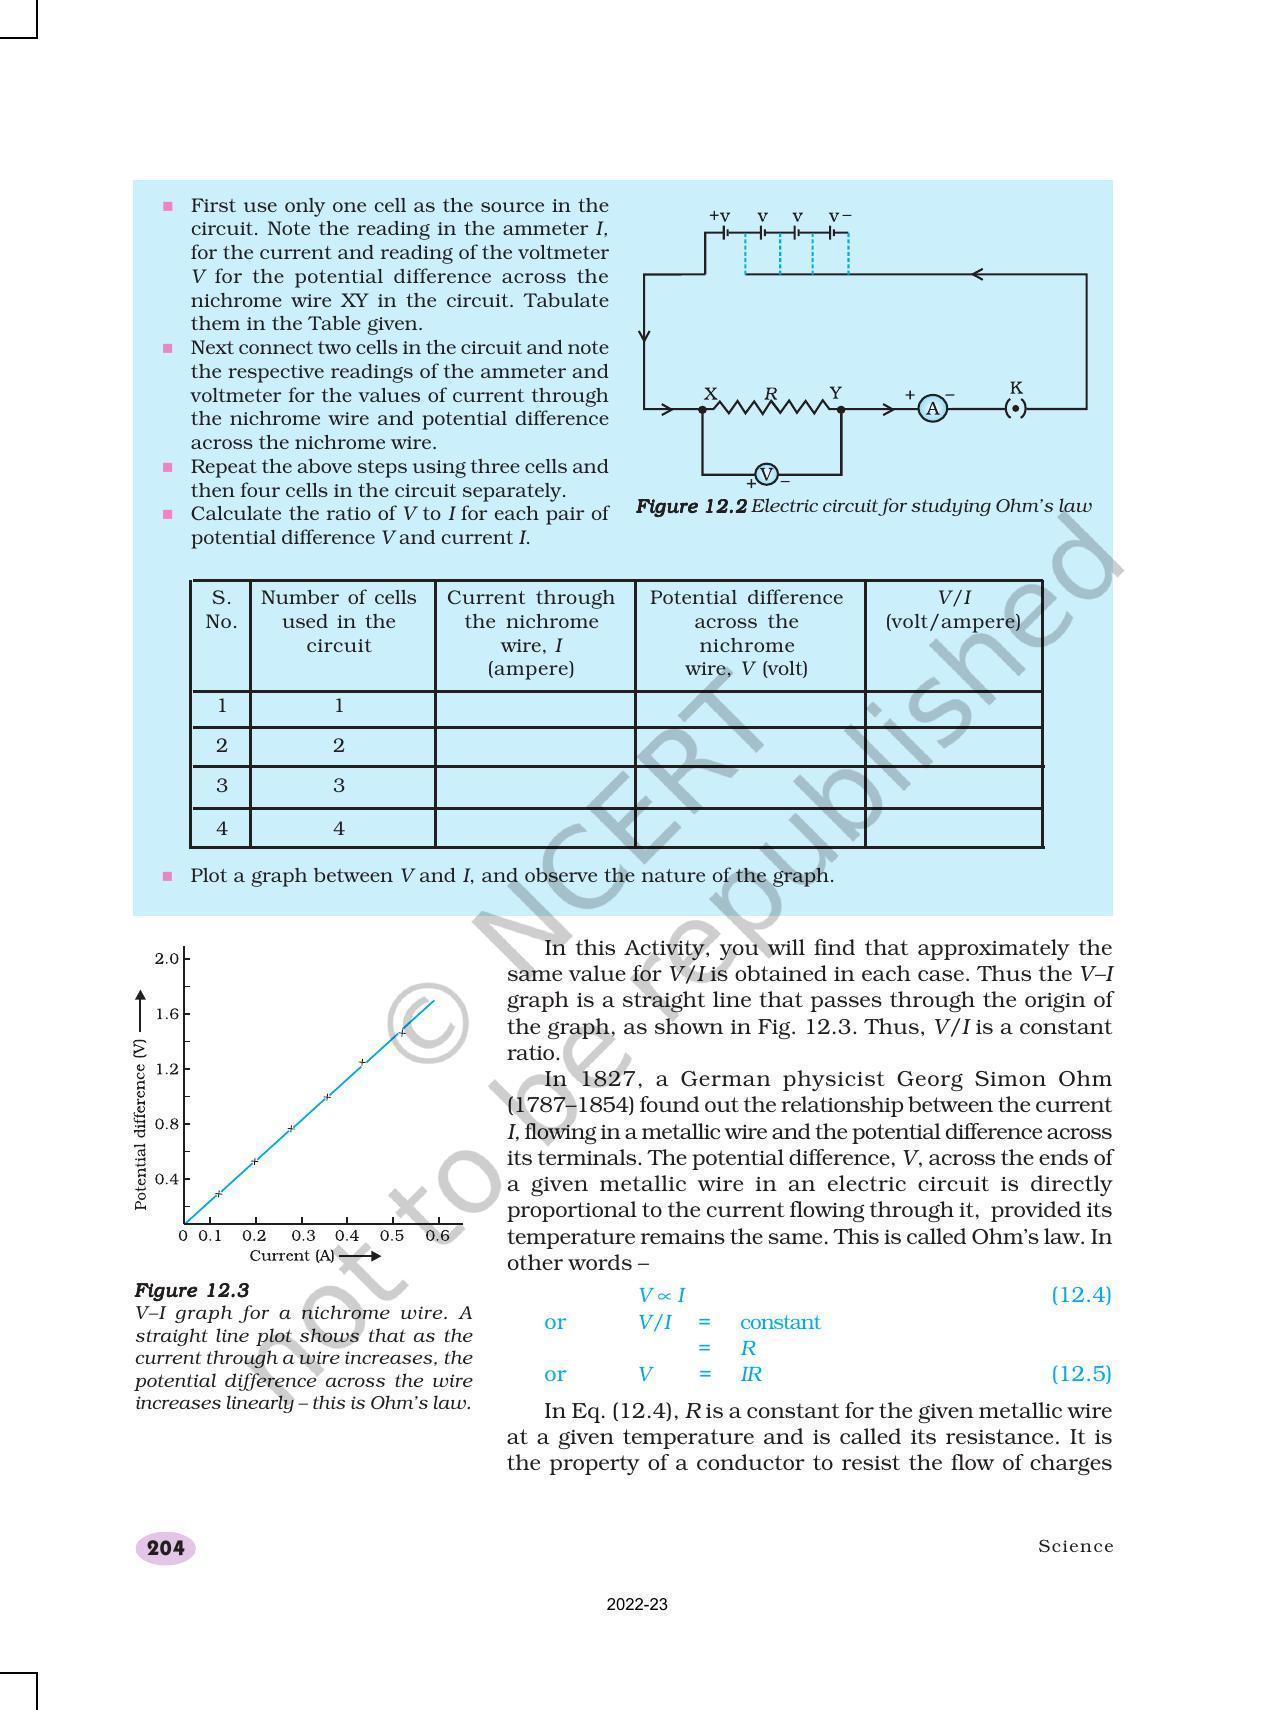 NCERT Book for Class 10 Science Chapter 12 Electricity - Page 6